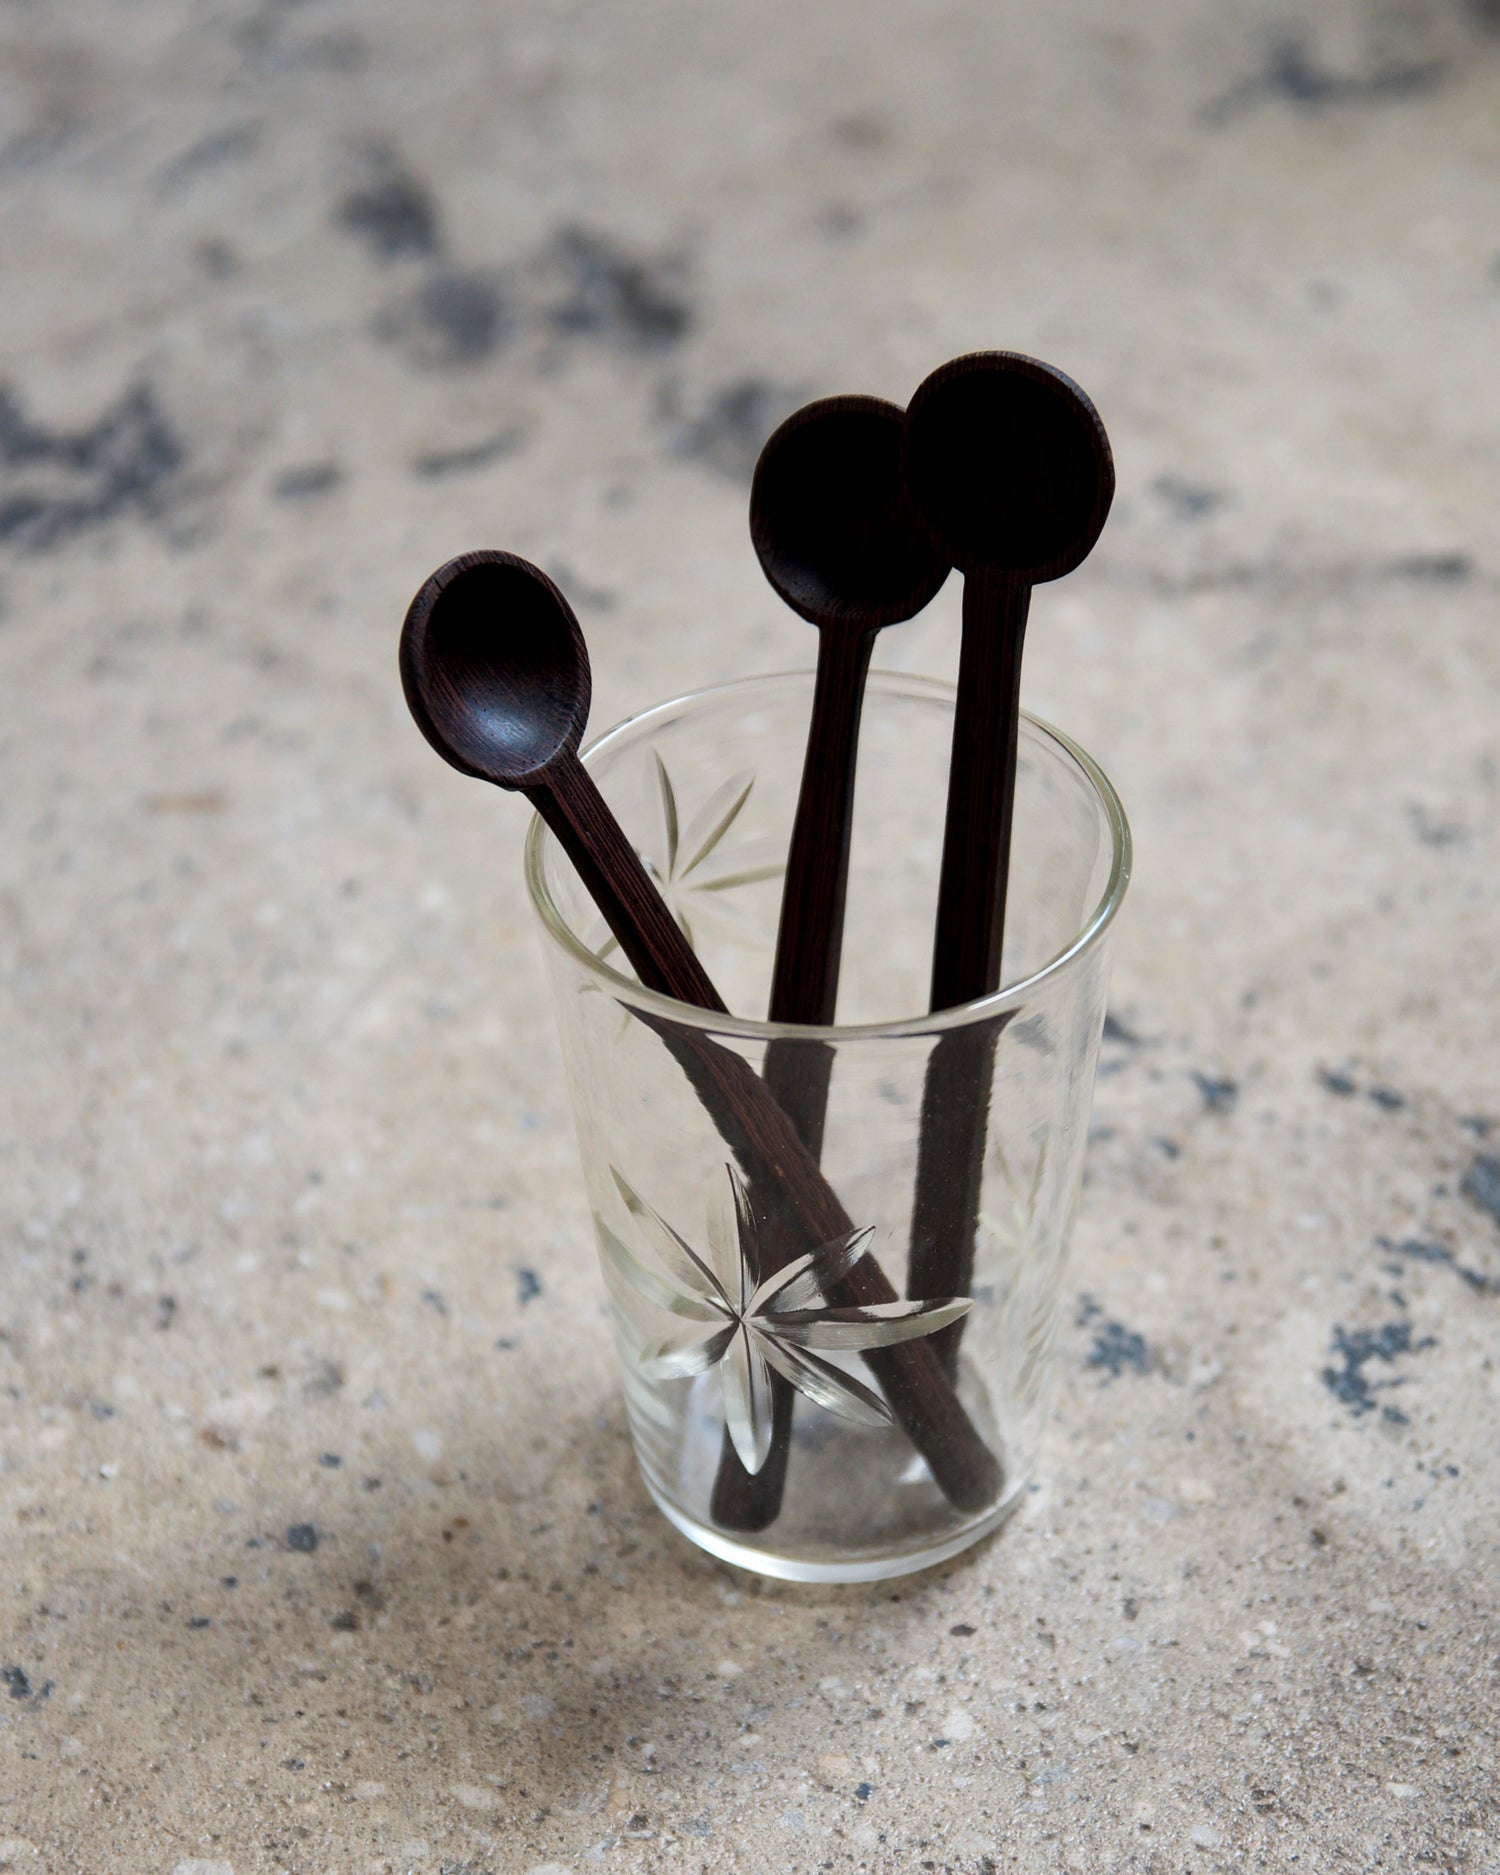 In situation image of three hand carved tagaya wood spoons by Nalata Nalata in a carved glass cup on a cement surface. 